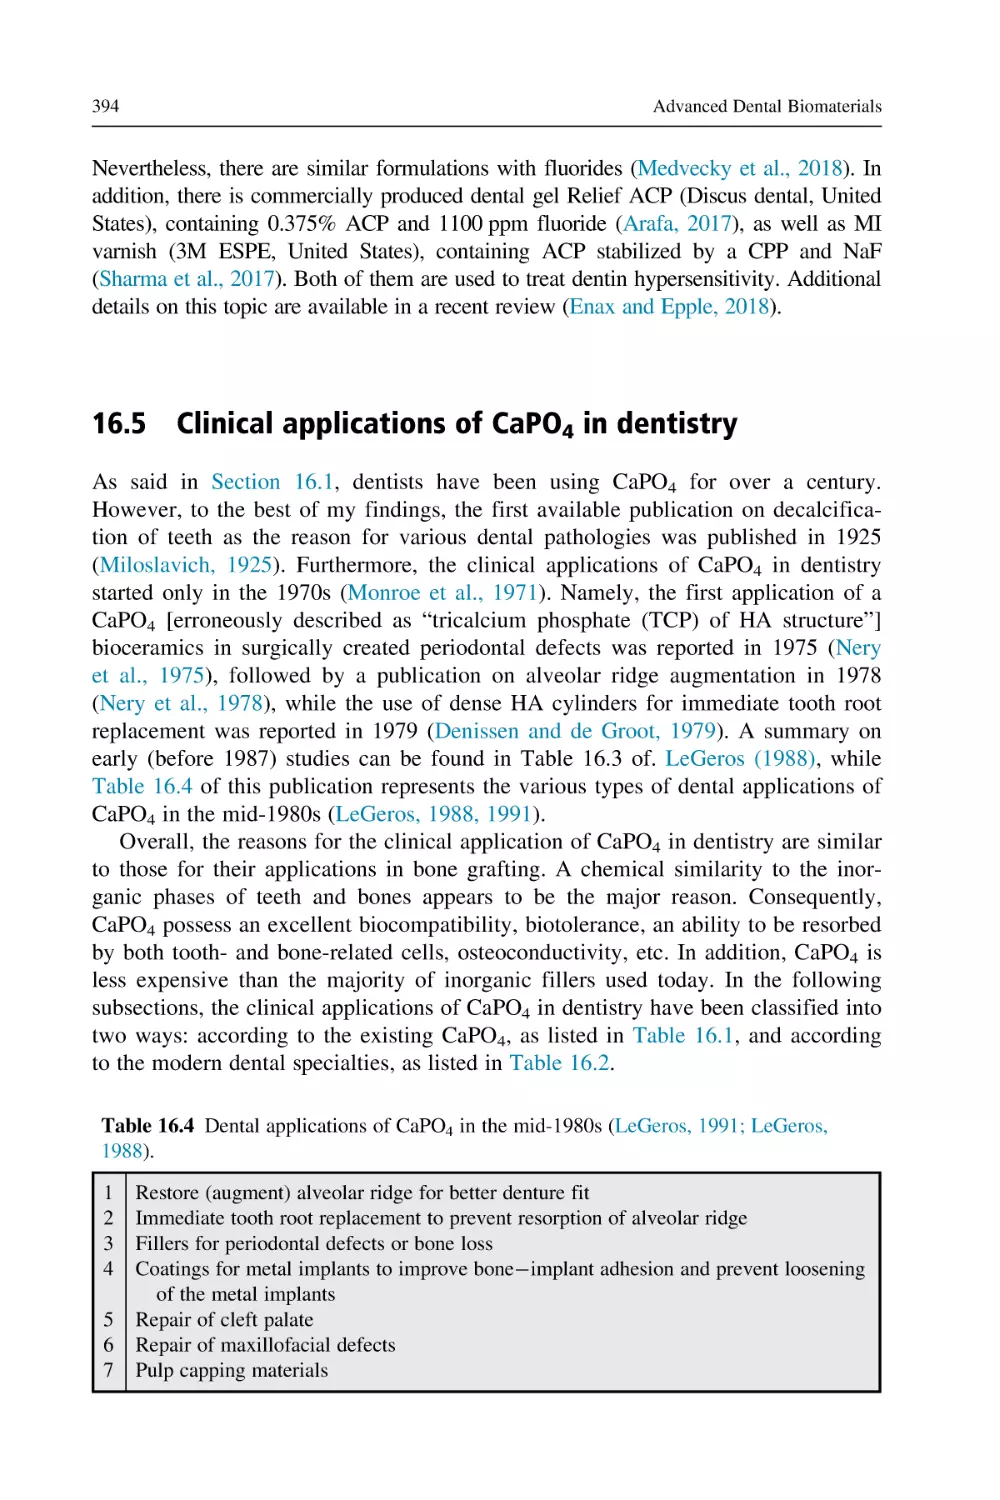 16.5 Clinical applications of CaPO4 in dentistry